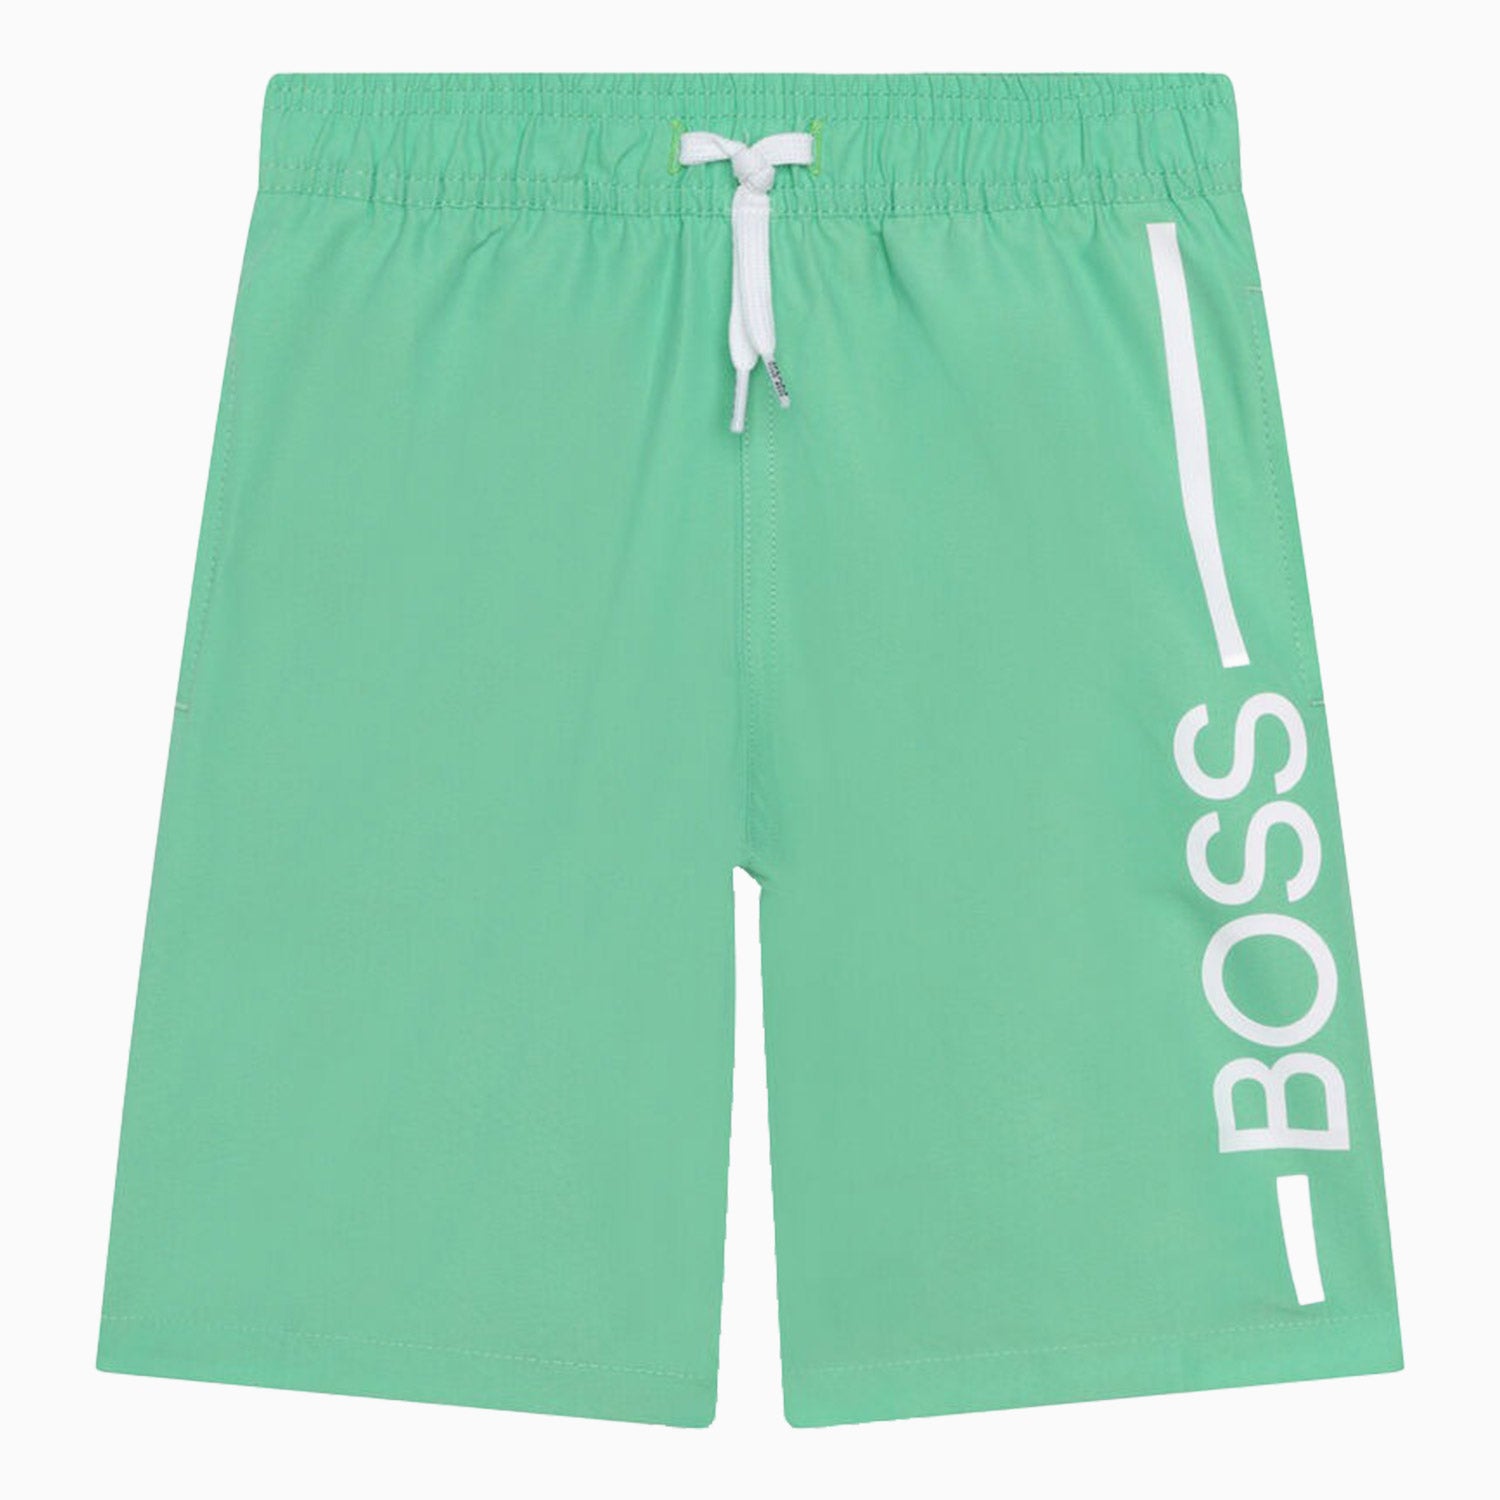 Hugo Boss Kid's Surfer Outfit - Color: Navy, Yellow, Electric Blue, Green, Red - Kids Premium Clothing -